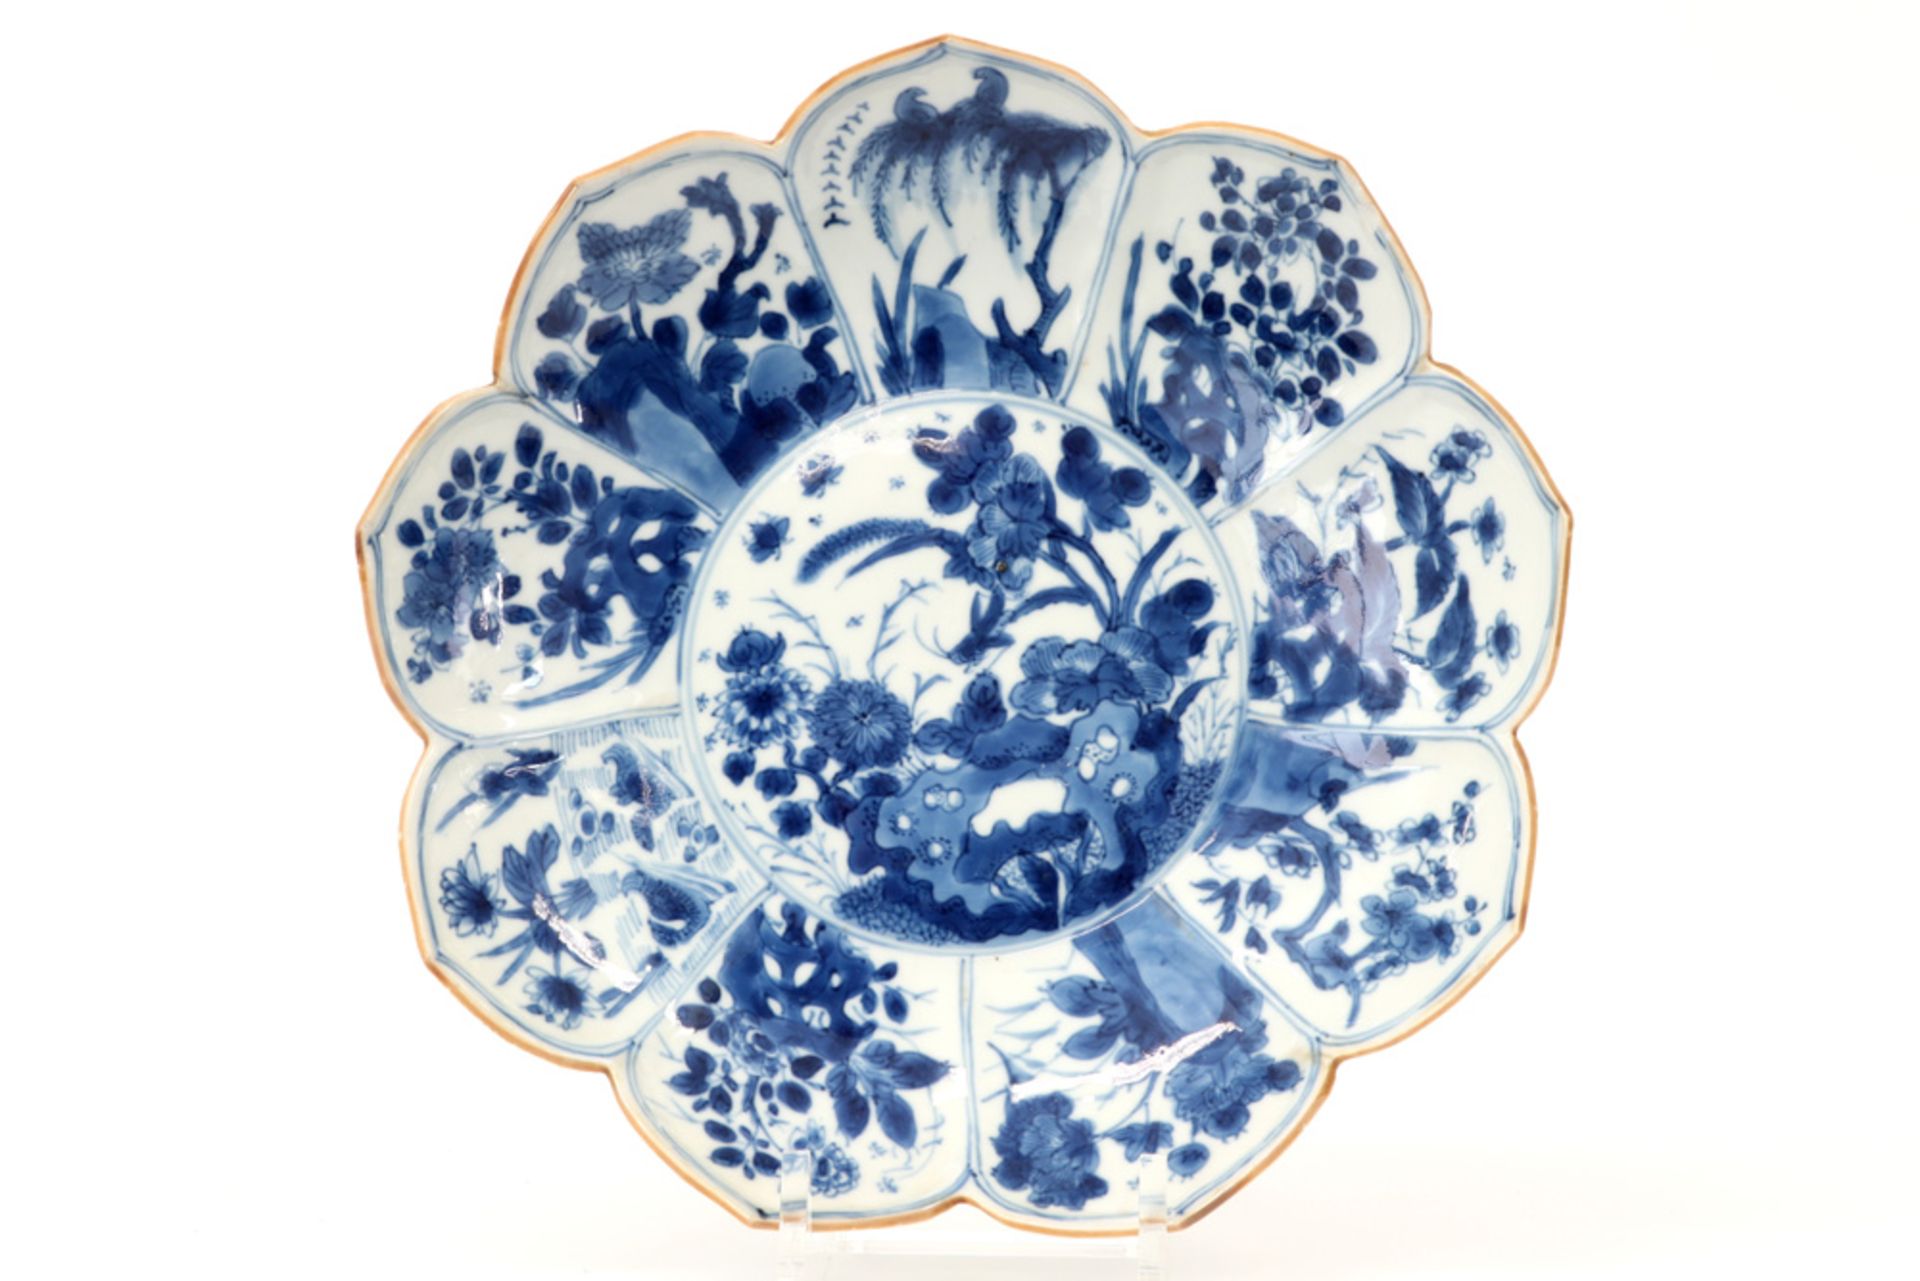 17th/18th Cent. lotusflower-shaped Chinese Kang Hsi period dish in porcelain with a blue-white decor